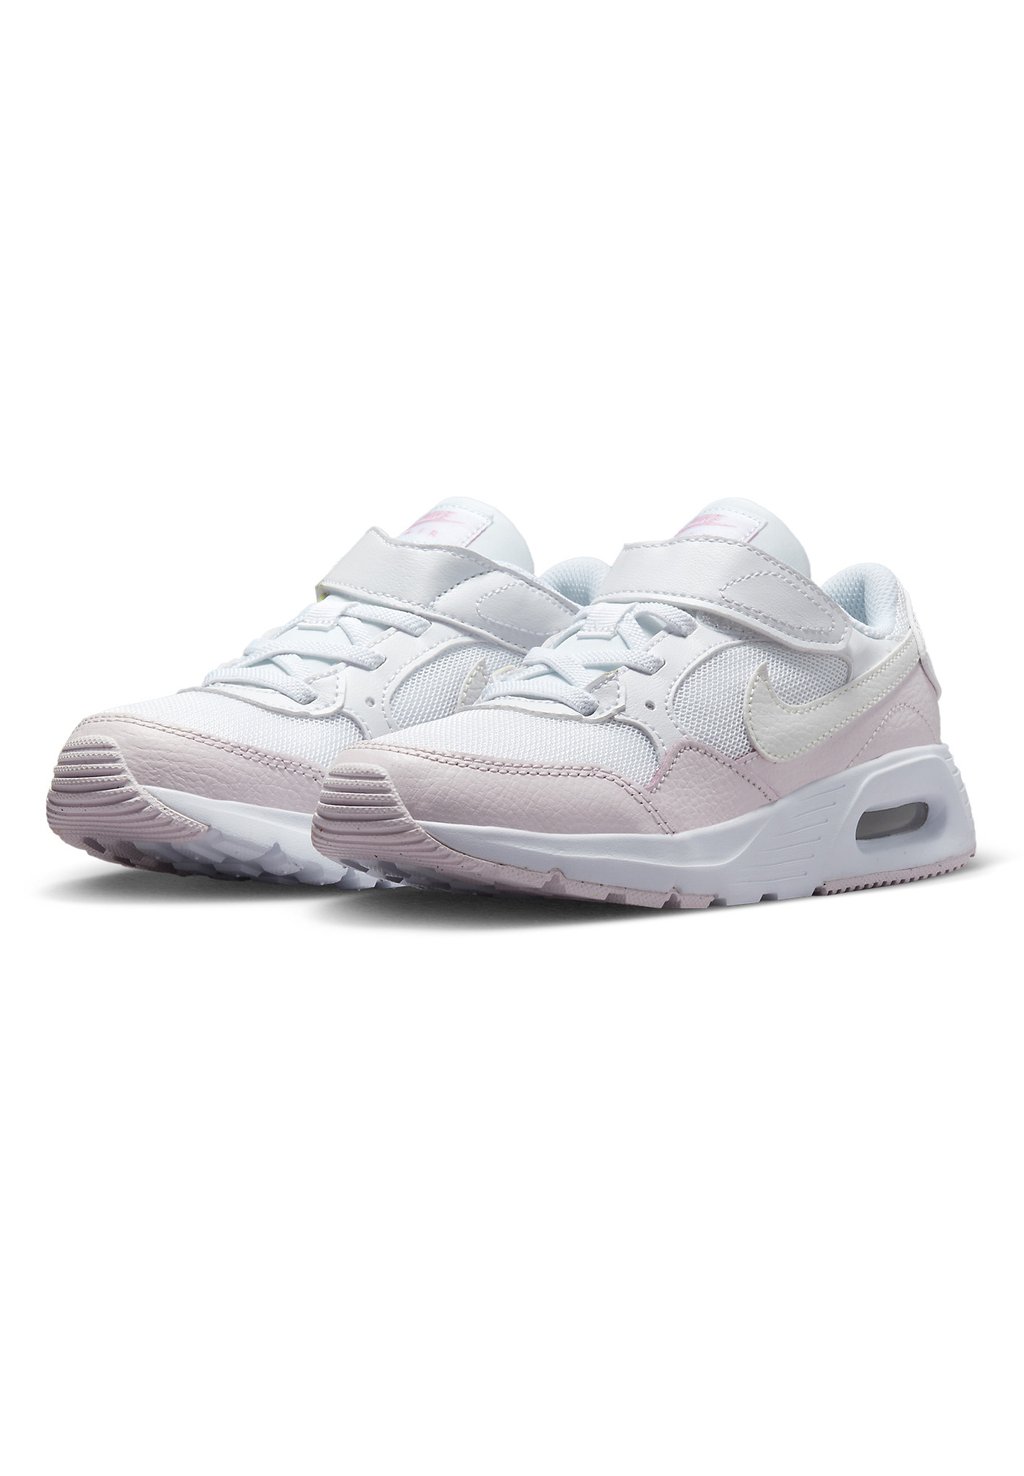 pink pearl Кроссовки низкие AIR MAX UNISEX Nike Sportswear, цвет white/summit white-pearl pink med soft pink